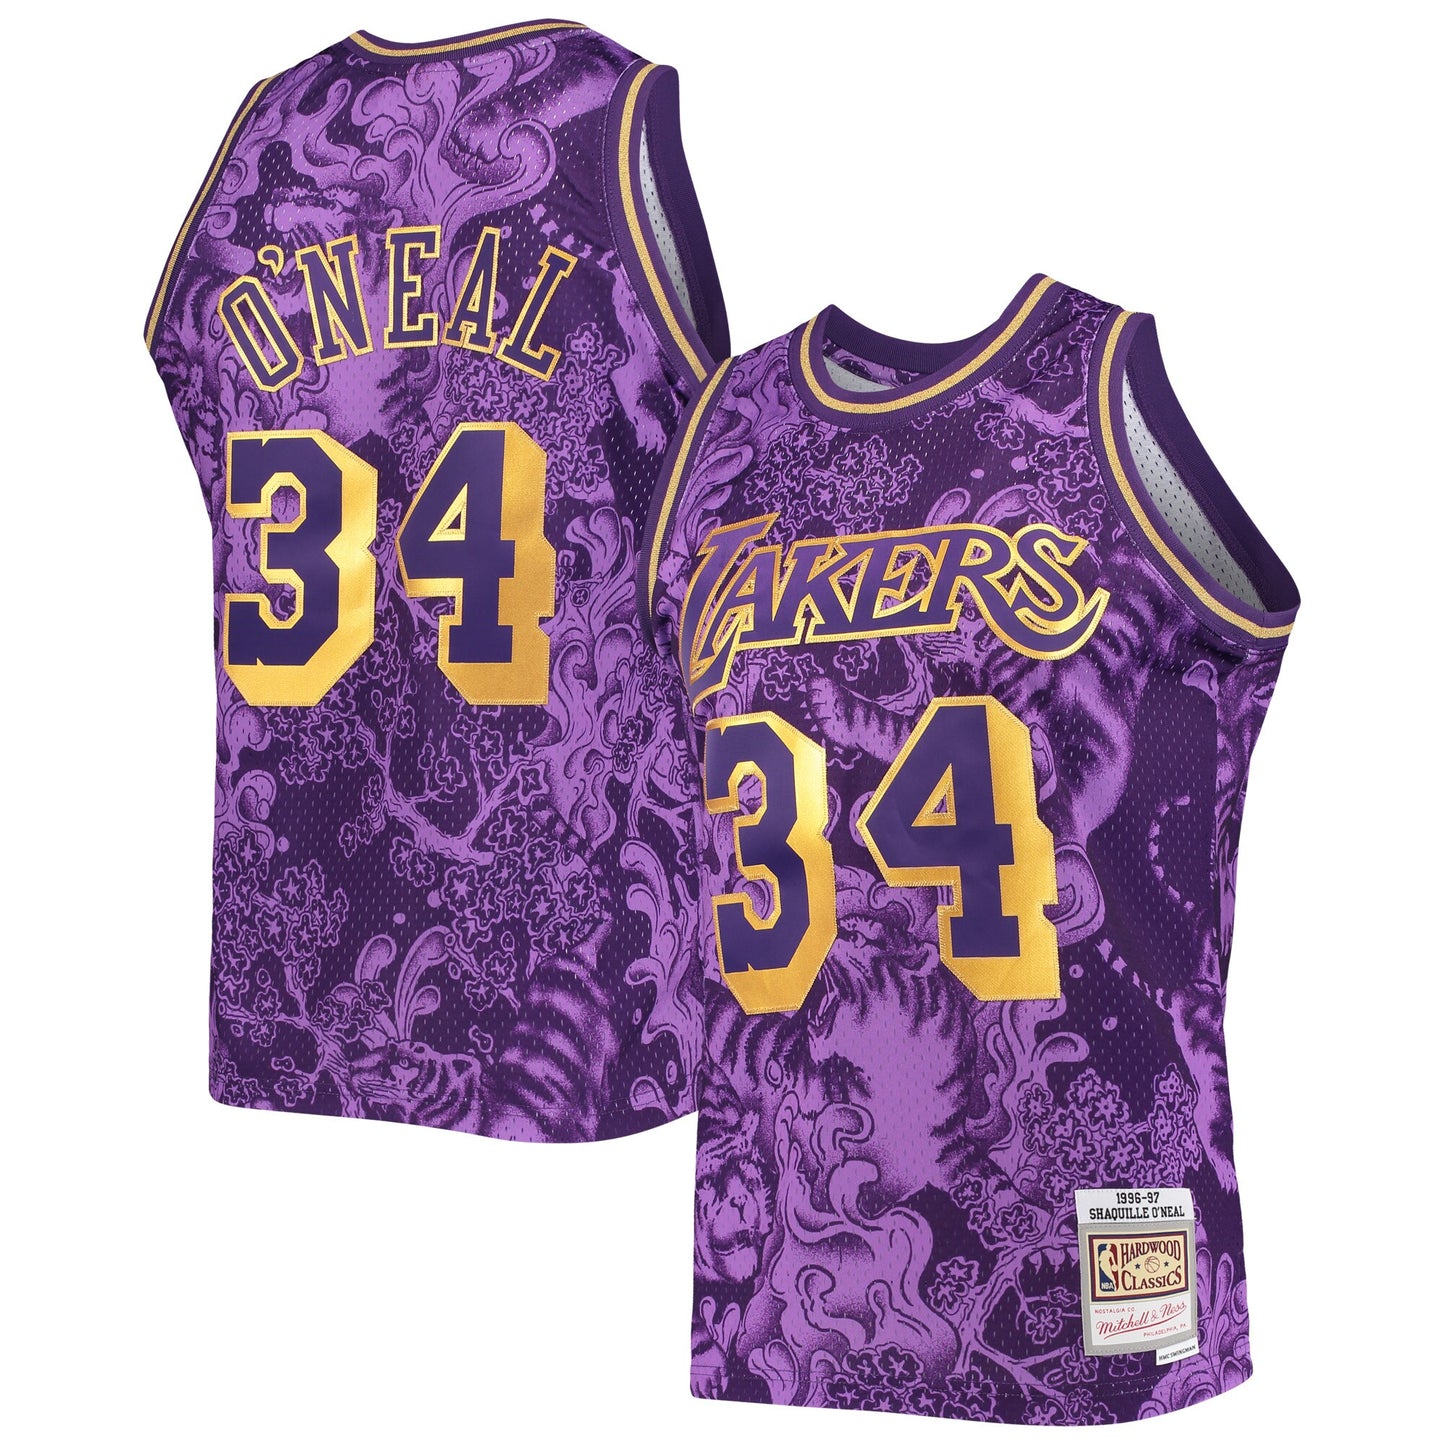 Shaquille O'Neal Los Angeles Lakers Mitchell & Ness Hardwood Classics 1996/97 Lunar New Year Swingman Jersey - Purple